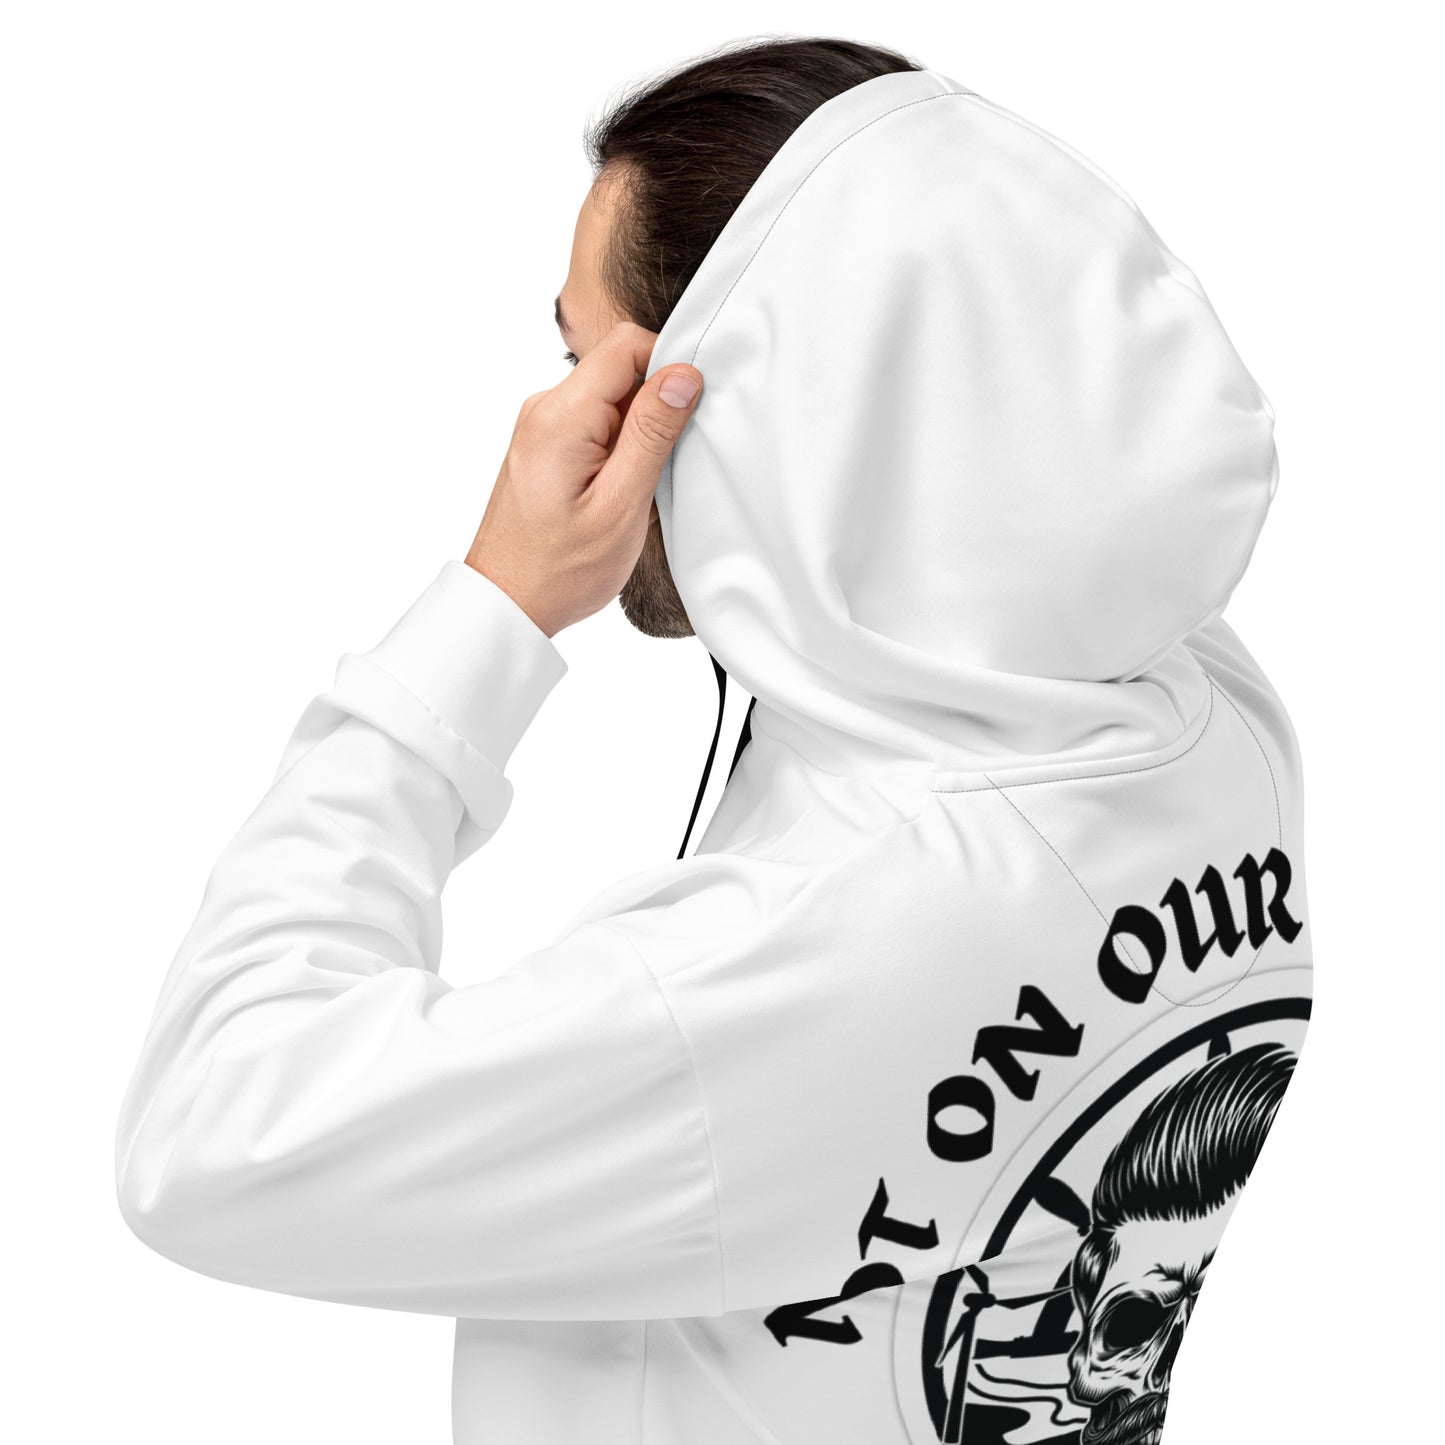 'Not On Our Watch' Hooded Sweatshirt for Men and Women